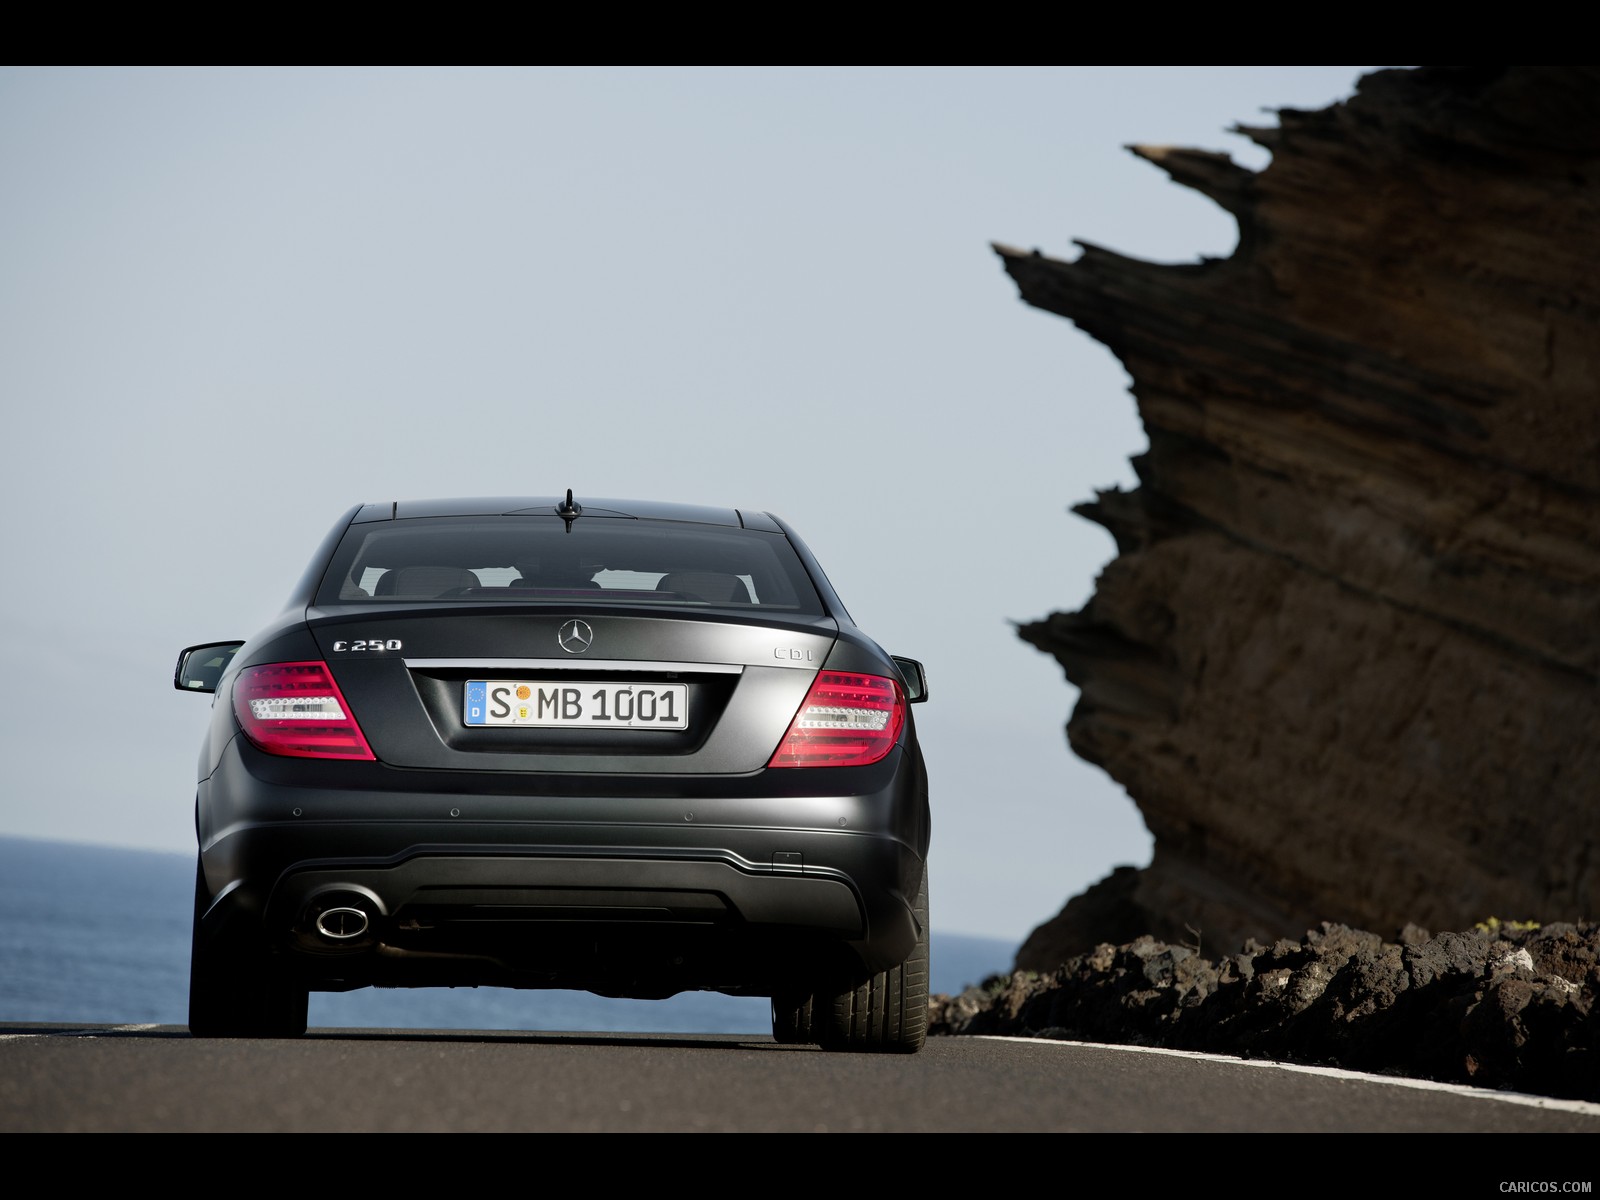 Mercedes-Benz C-Class Coupe (2012)  - Rear , #8 of 79